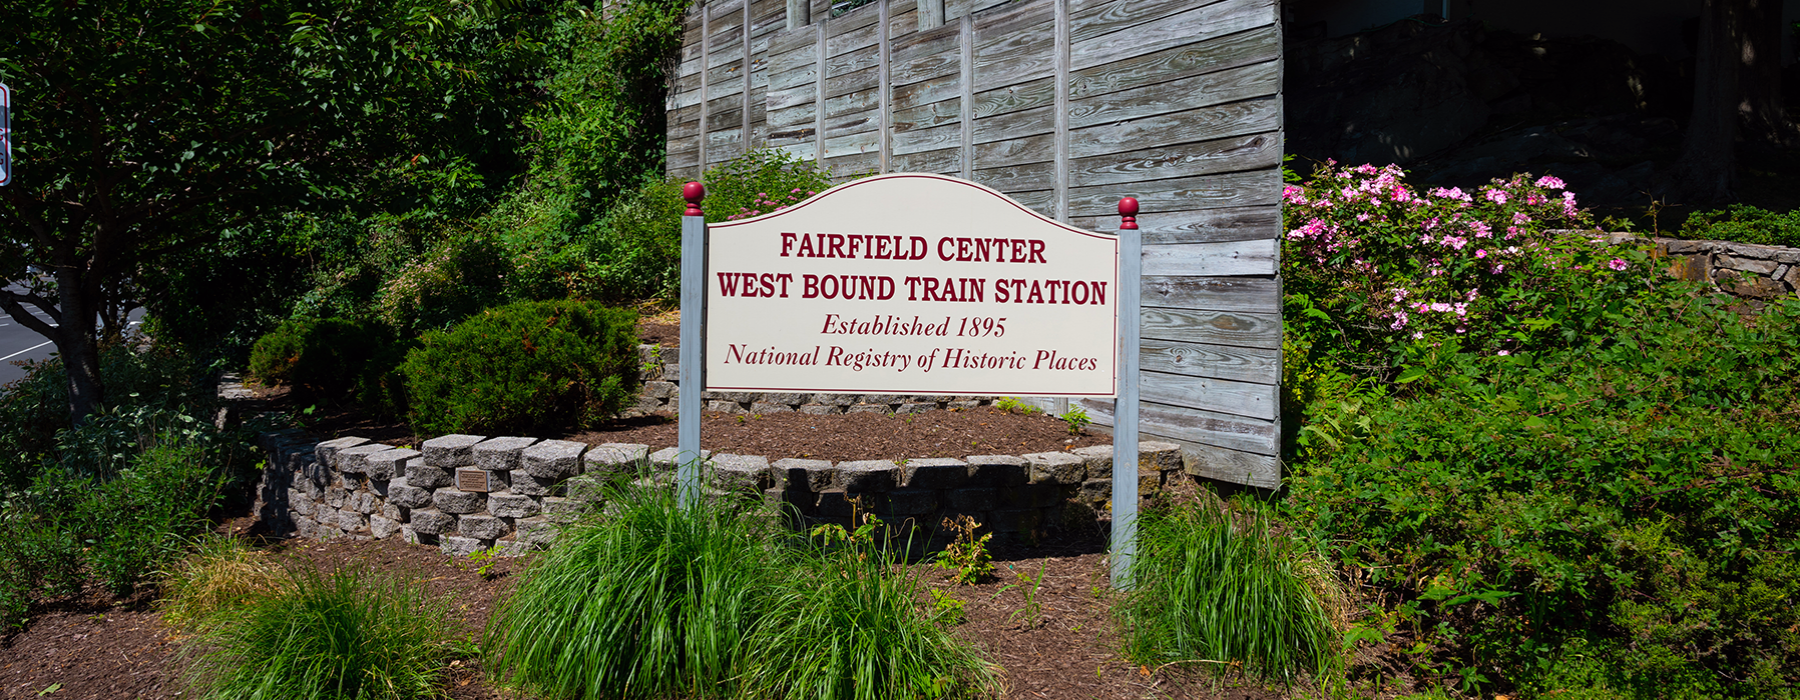 outside image of "Fairfield Center West Bound Train Station" wooden sign.  